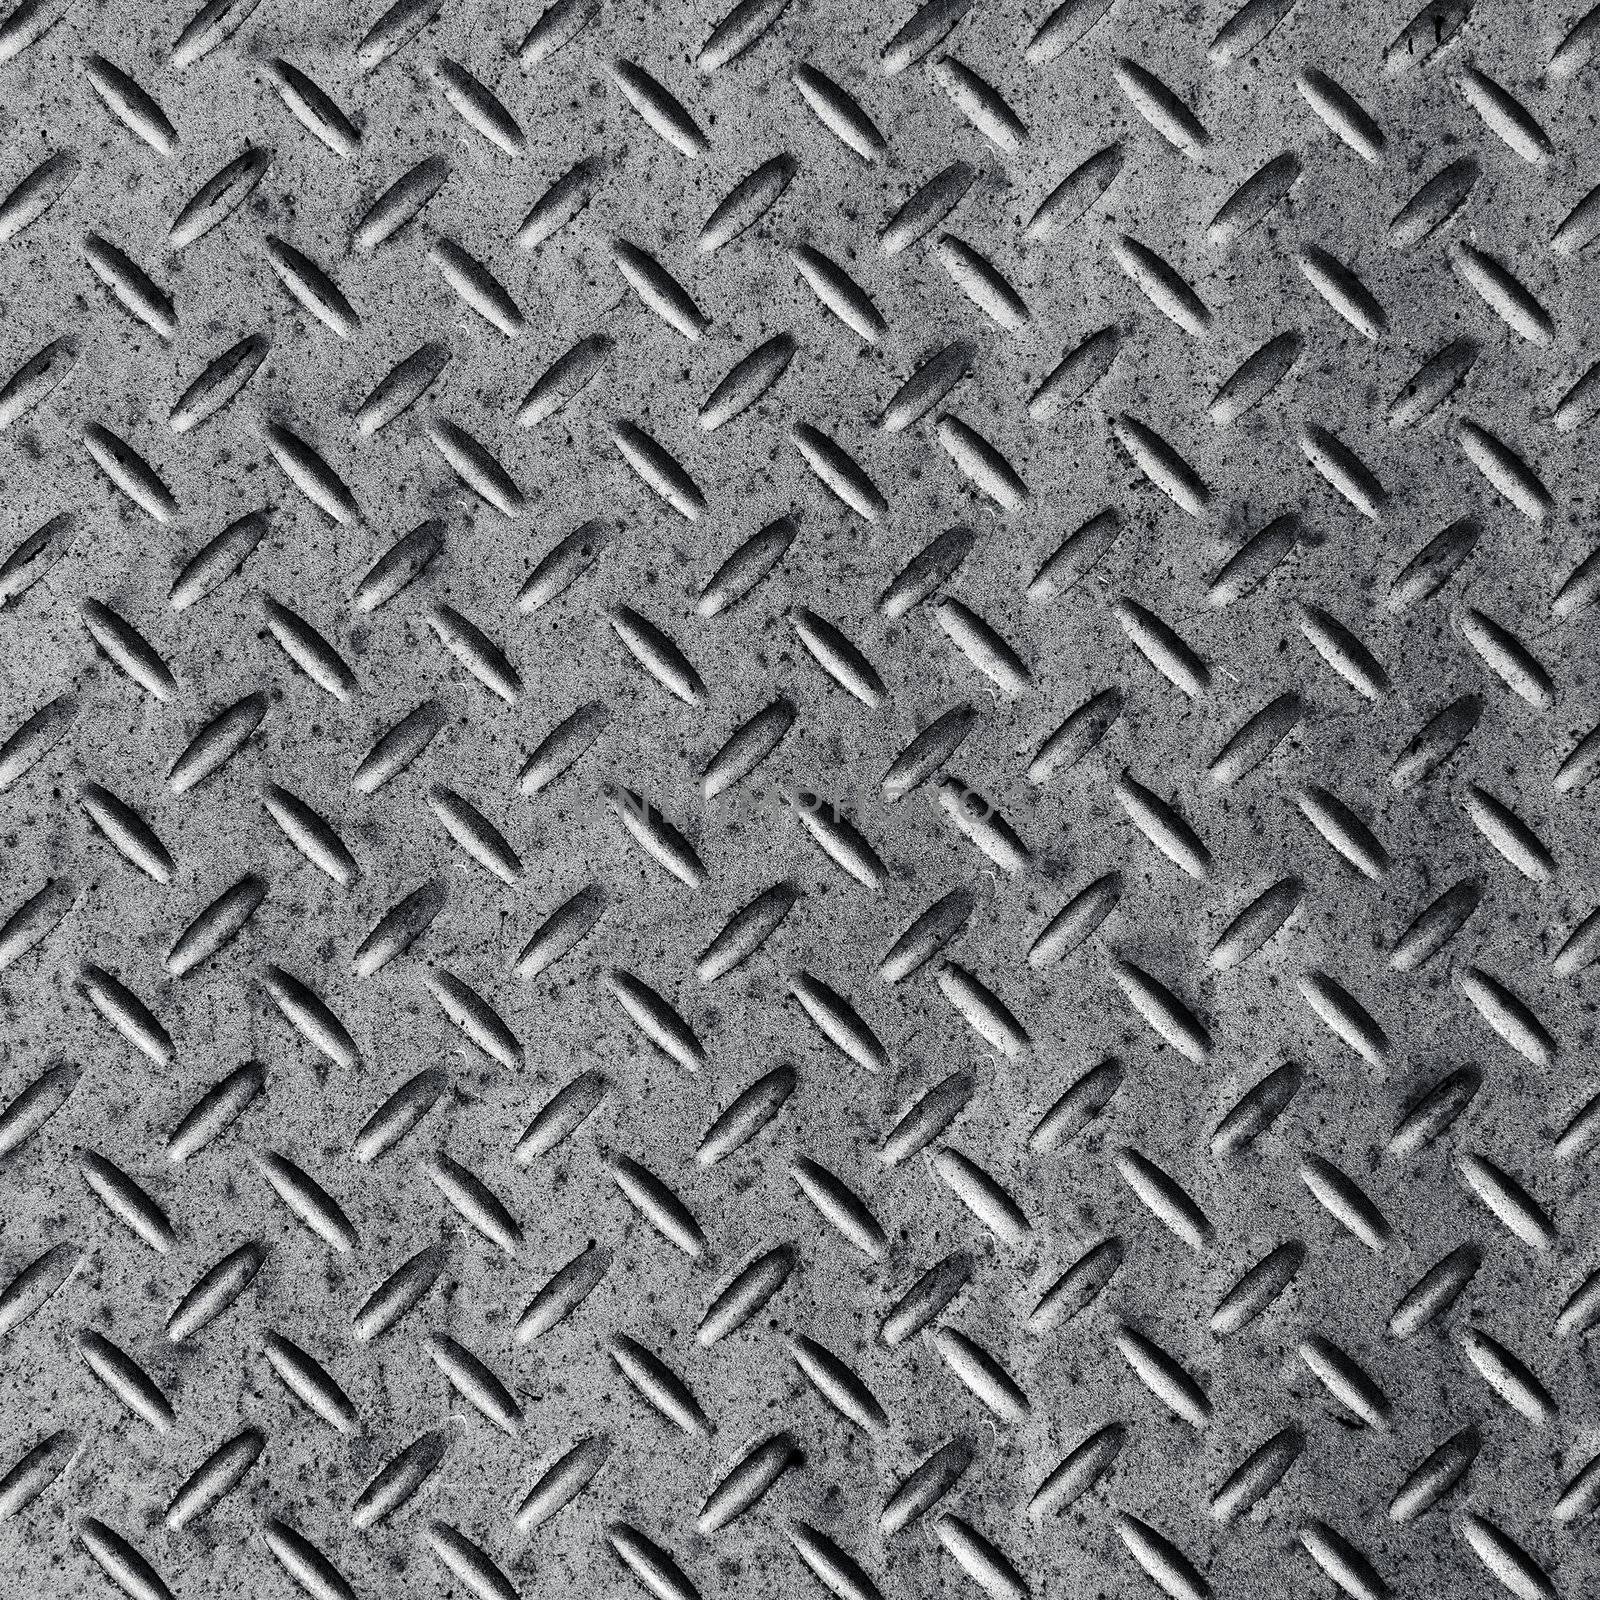 Background of metal diamond plate in silver color.